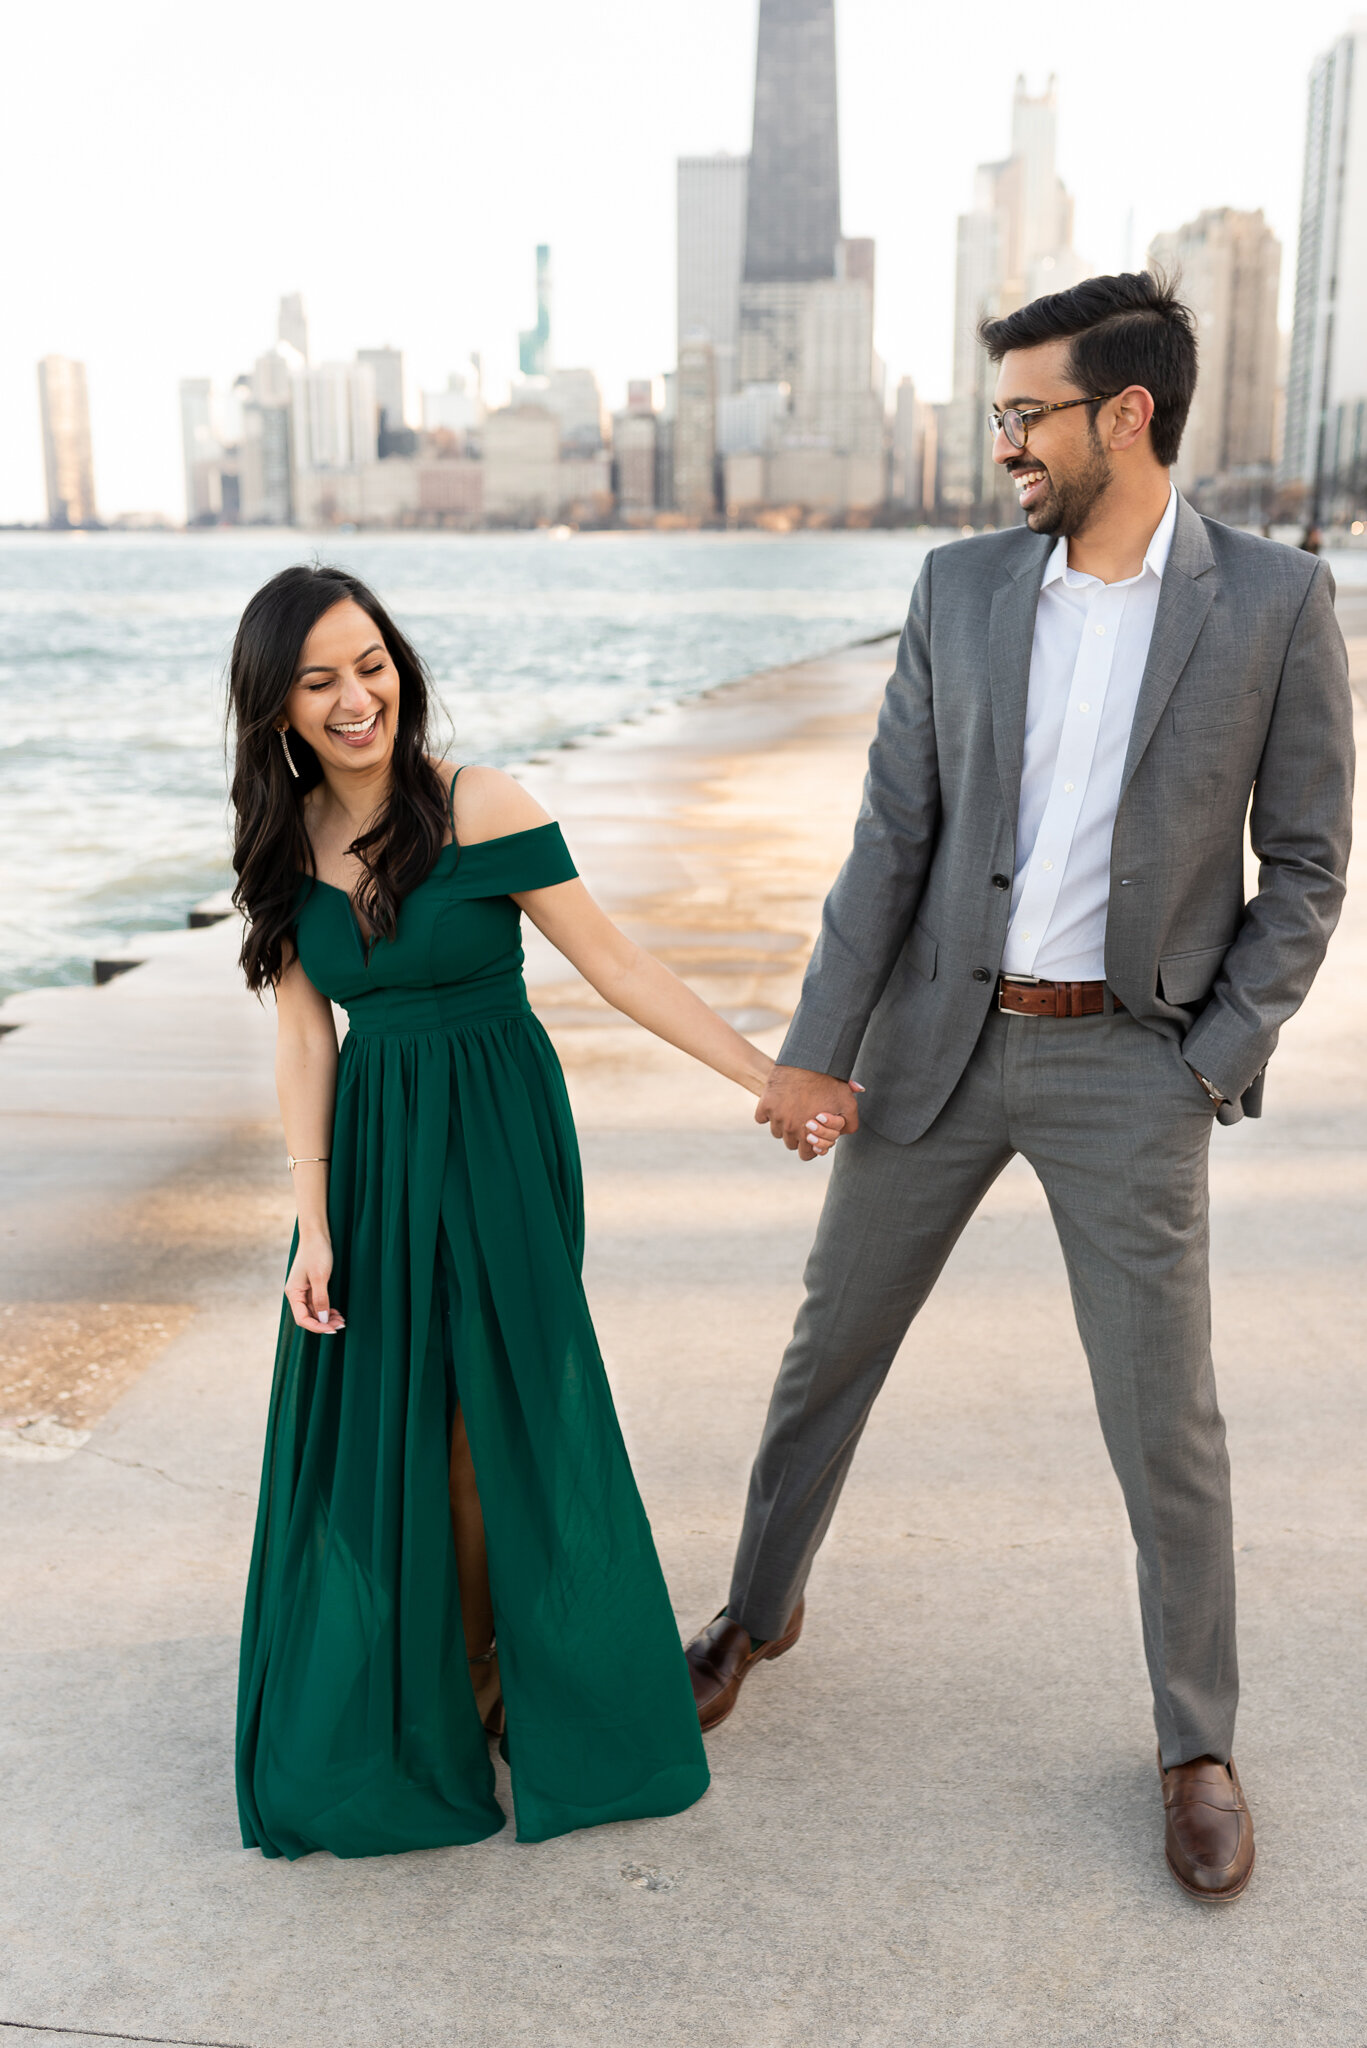 Glenview Engagement Photographer, Chicago Engagement Photographer, Chicago Engagement Photography, North Avenue Beach Engagement Session, Chicago Engagement Session (12 of 22).jpg